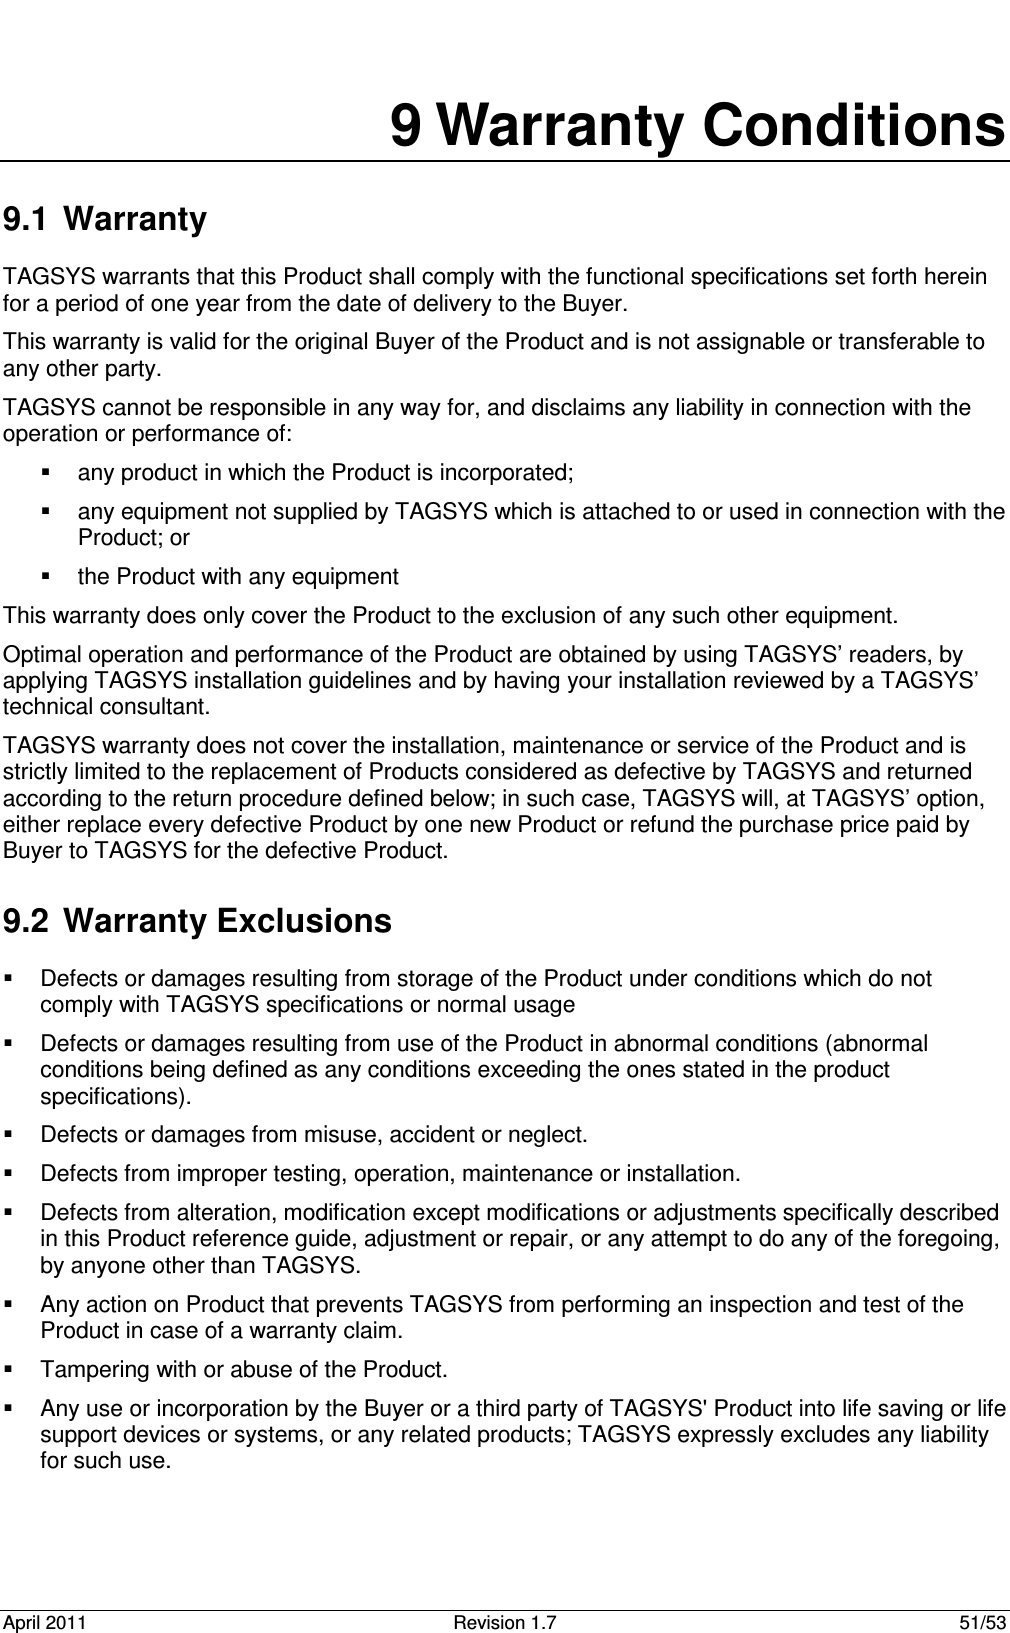  April 2011  Revision 1.7  51/53  9 Warranty Conditions 9.1  Warranty TAGSYS warrants that this Product shall comply with the functional specifications set forth herein for a period of one year from the date of delivery to the Buyer. This warranty is valid for the original Buyer of the Product and is not assignable or transferable to any other party. TAGSYS cannot be responsible in any way for, and disclaims any liability in connection with the operation or performance of:   any product in which the Product is incorporated;   any equipment not supplied by TAGSYS which is attached to or used in connection with the Product; or   the Product with any equipment This warranty does only cover the Product to the exclusion of any such other equipment. Optimal operation and performance of the Product are obtained by using TAGSYS’ readers, by applying TAGSYS installation guidelines and by having your installation reviewed by a TAGSYS’ technical consultant. TAGSYS warranty does not cover the installation, maintenance or service of the Product and is strictly limited to the replacement of Products considered as defective by TAGSYS and returned according to the return procedure defined below; in such case, TAGSYS will, at TAGSYS’ option, either replace every defective Product by one new Product or refund the purchase price paid by Buyer to TAGSYS for the defective Product. 9.2  Warranty Exclusions   Defects or damages resulting from storage of the Product under conditions which do not comply with TAGSYS specifications or normal usage   Defects or damages resulting from use of the Product in abnormal conditions (abnormal conditions being defined as any conditions exceeding the ones stated in the product specifications).   Defects or damages from misuse, accident or neglect.   Defects from improper testing, operation, maintenance or installation.   Defects from alteration, modification except modifications or adjustments specifically described in this Product reference guide, adjustment or repair, or any attempt to do any of the foregoing, by anyone other than TAGSYS.   Any action on Product that prevents TAGSYS from performing an inspection and test of the Product in case of a warranty claim.   Tampering with or abuse of the Product.   Any use or incorporation by the Buyer or a third party of TAGSYS&apos; Product into life saving or life support devices or systems, or any related products; TAGSYS expressly excludes any liability for such use. 